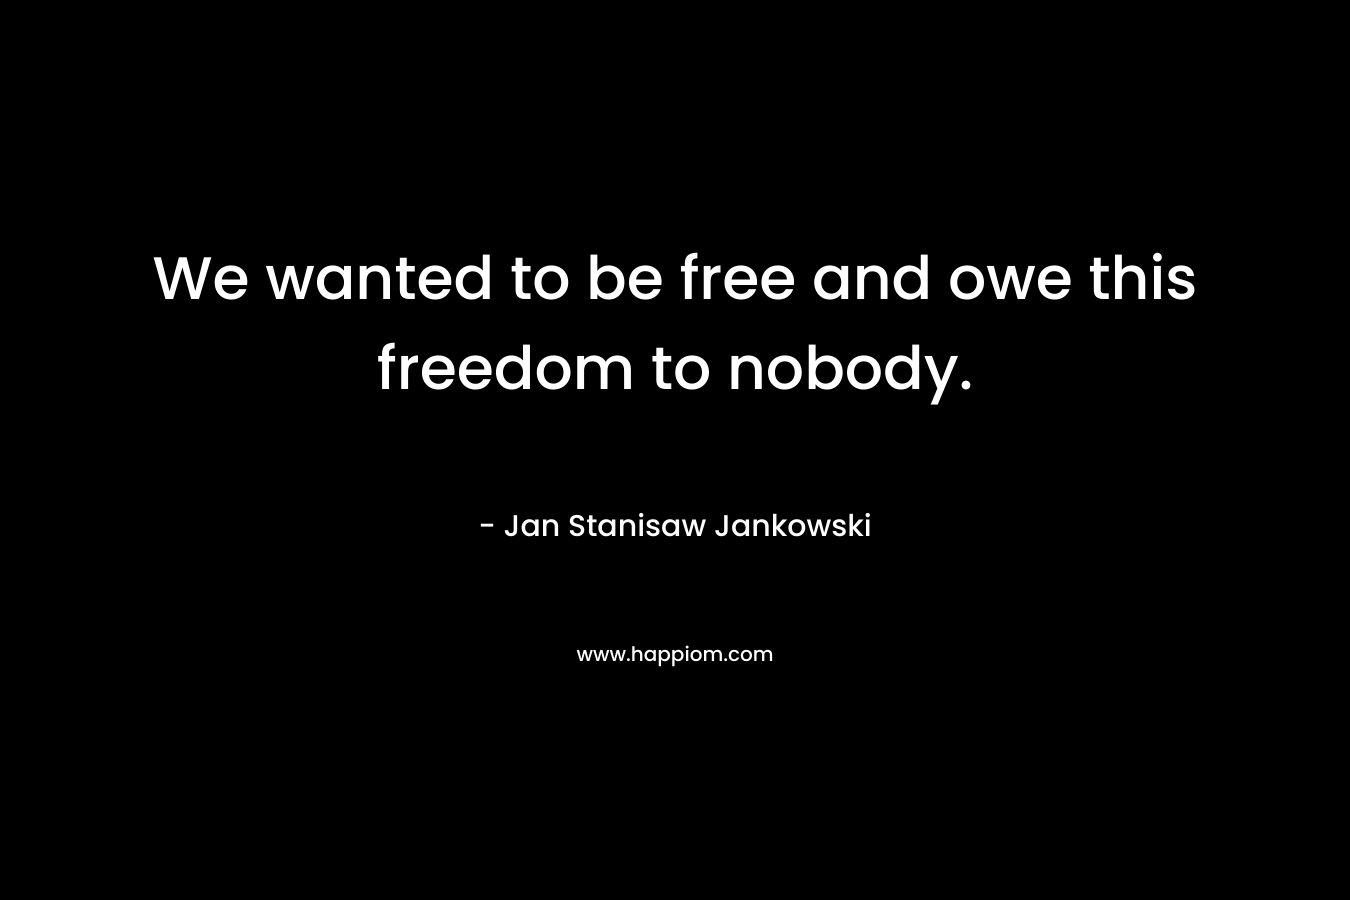 We wanted to be free and owe this freedom to nobody. – Jan Stanisaw Jankowski